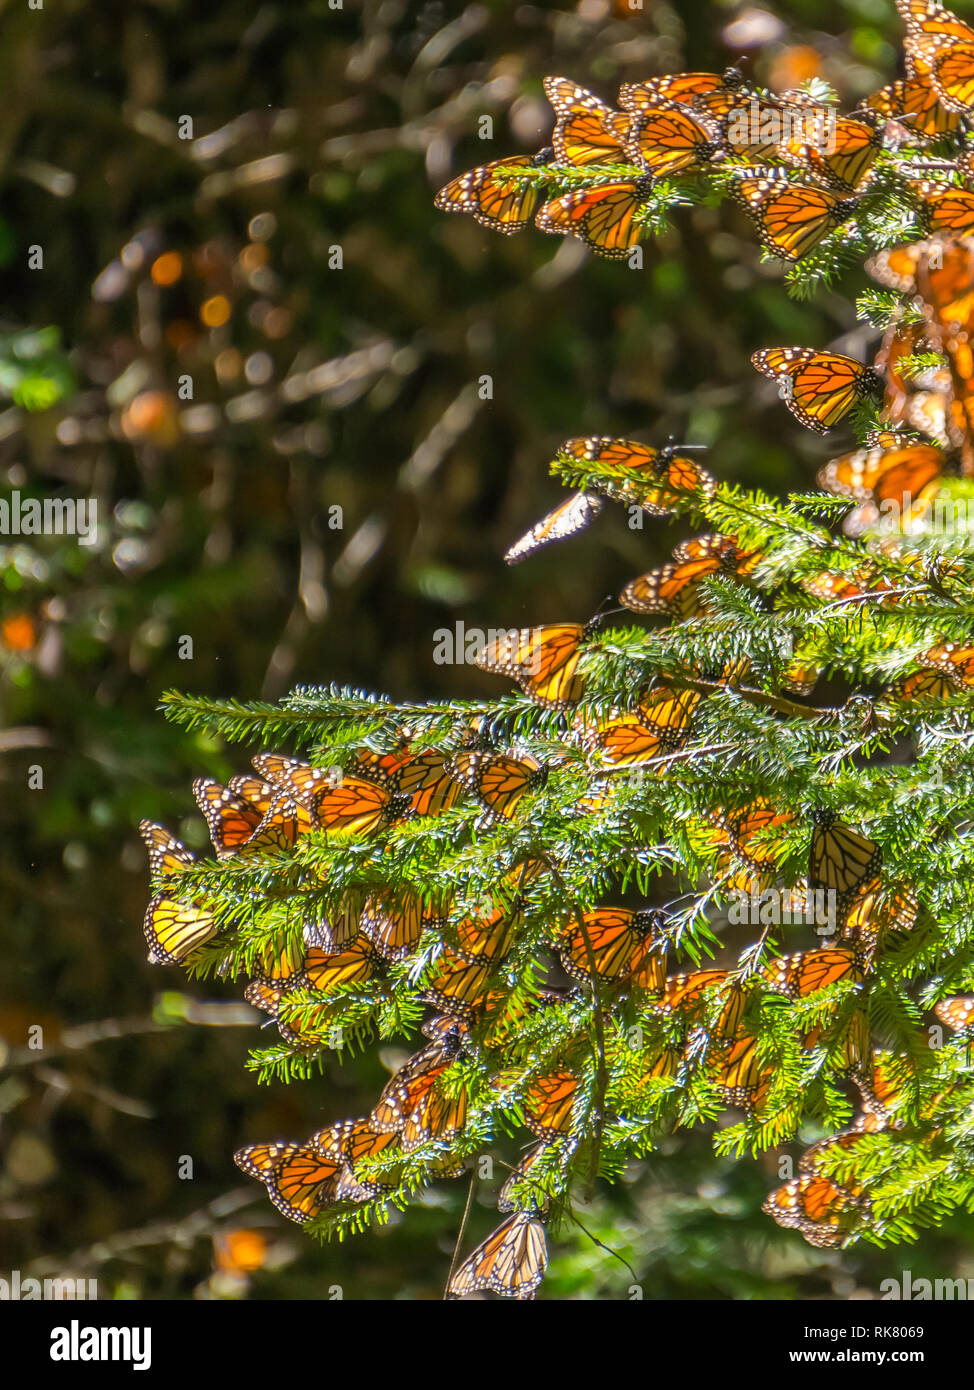 Monarch Butterflies on the tree branches at the Monarch Butterfly Biosphere Reserve in Michoacan, Mexico, a World Heritage Site. Stock Photo